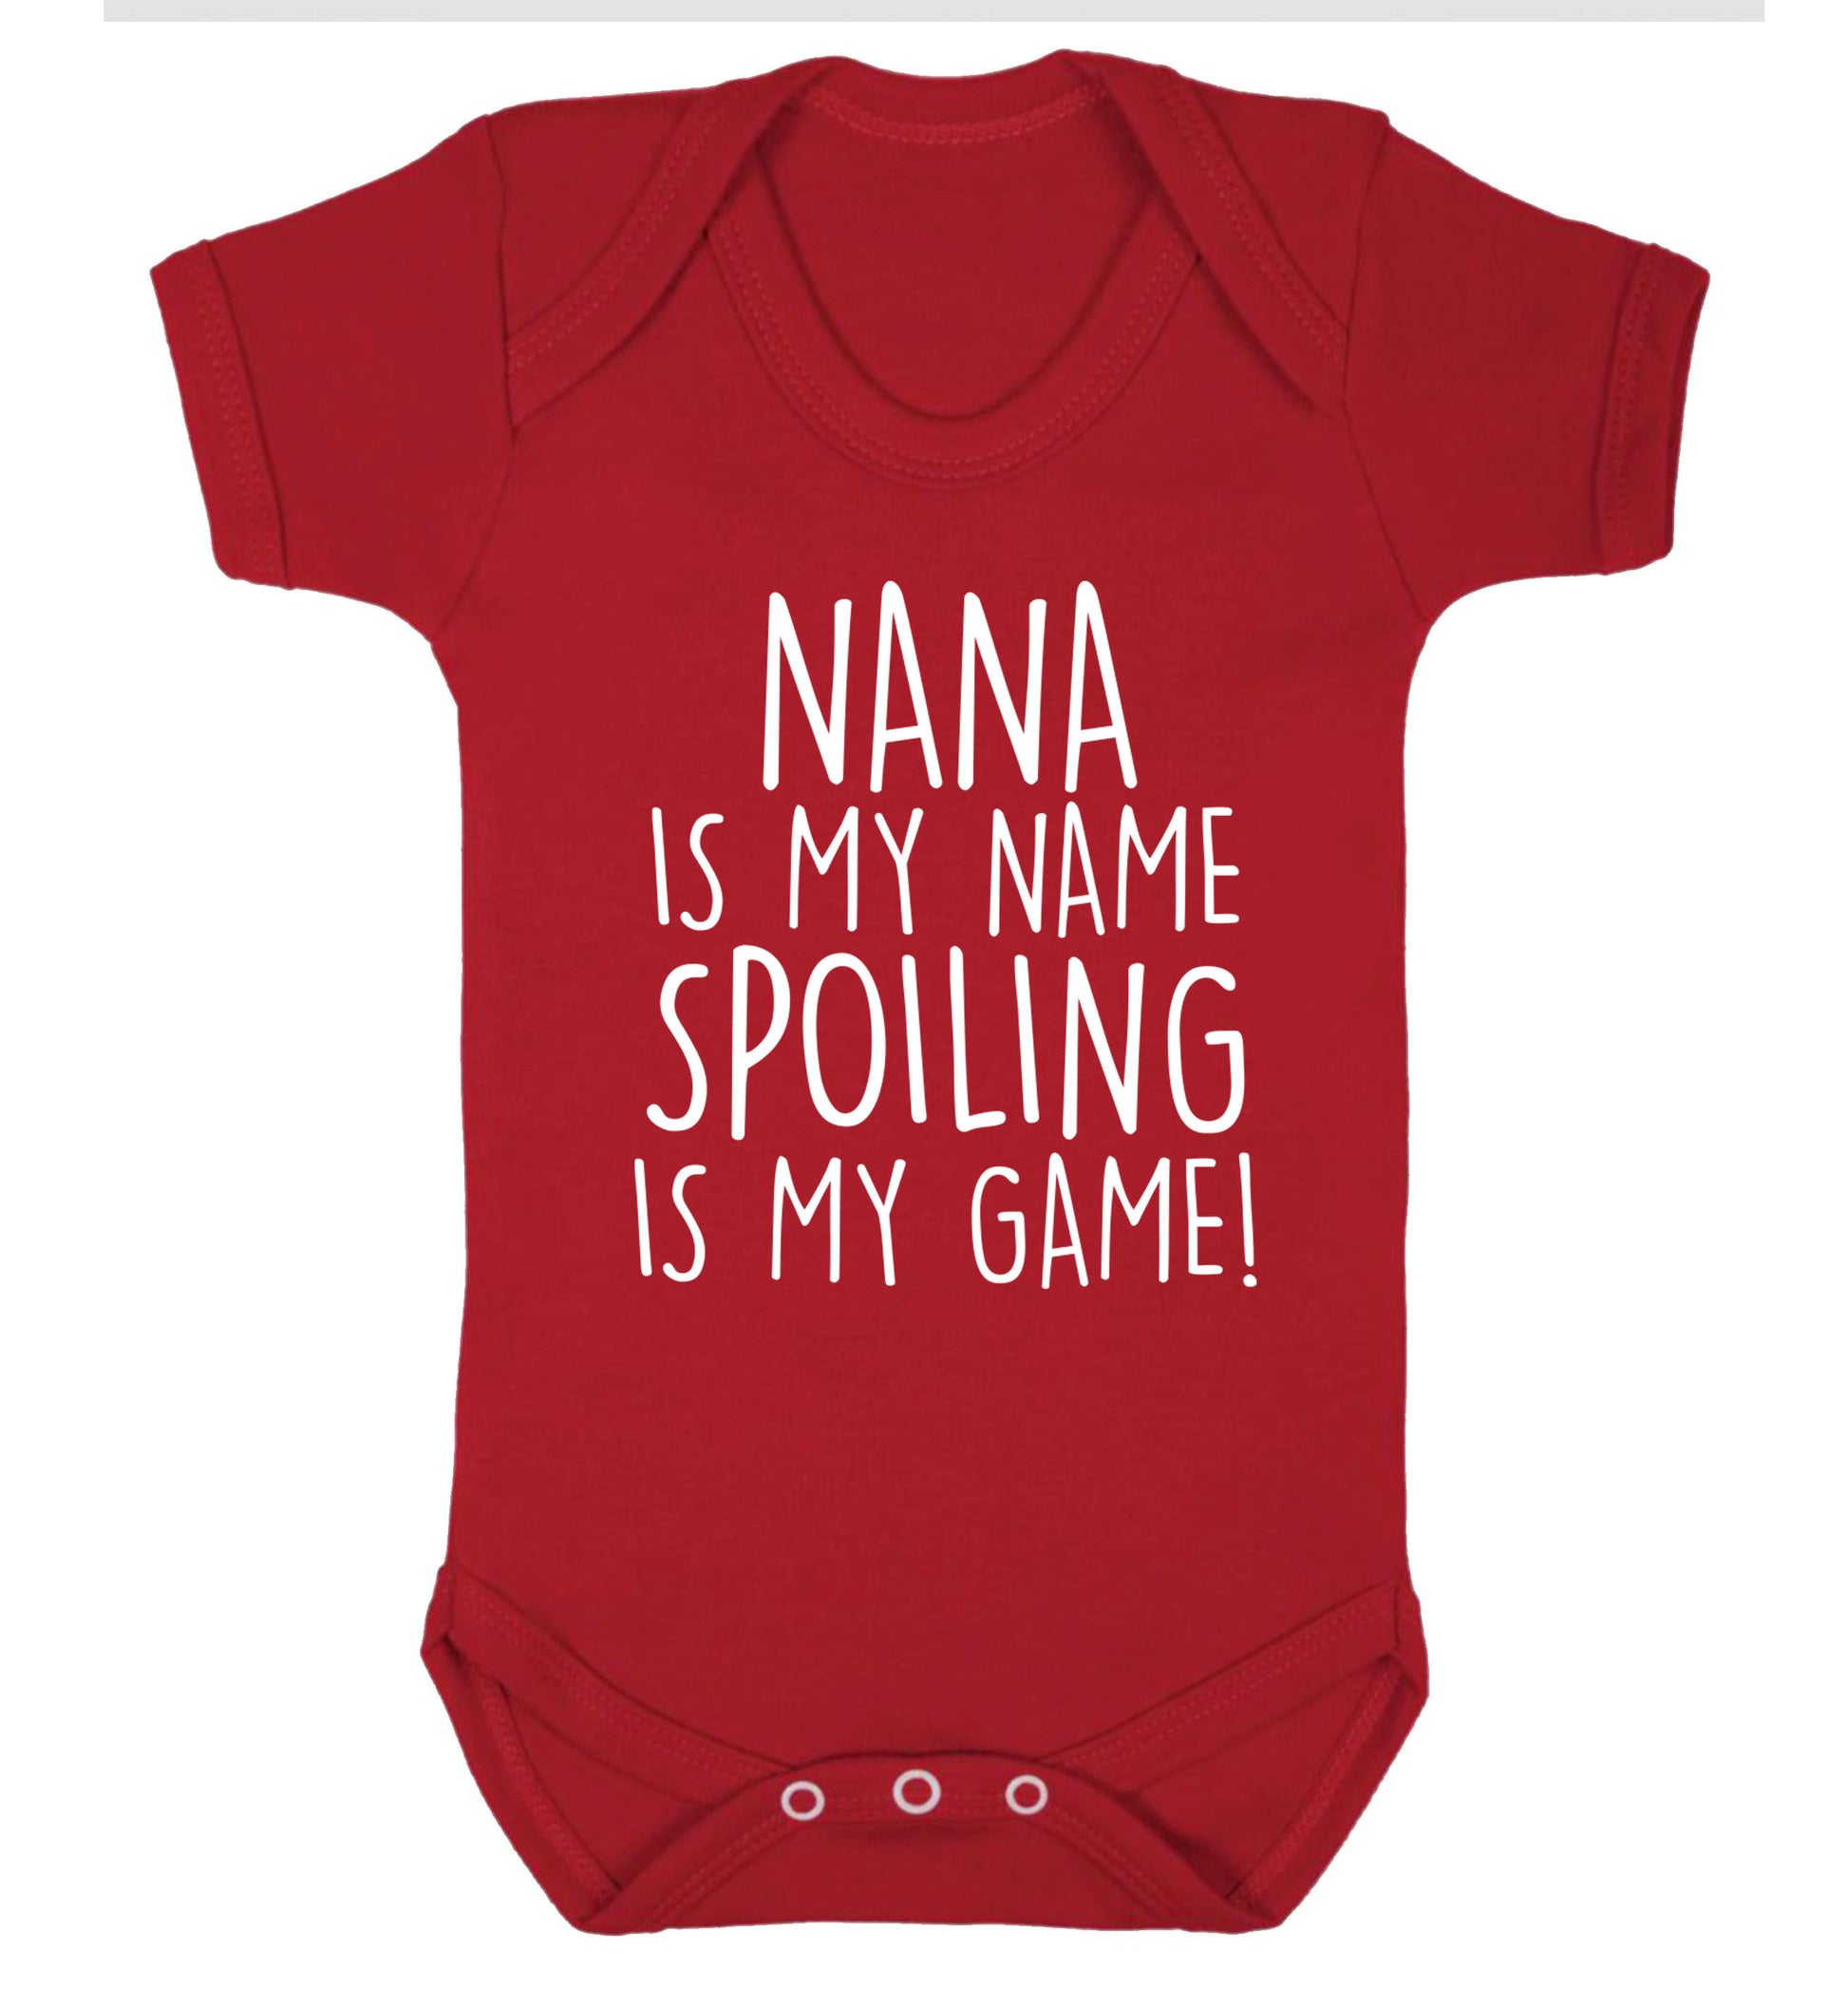 Nana is my name, spoiling is my game Baby Vest red 18-24 months